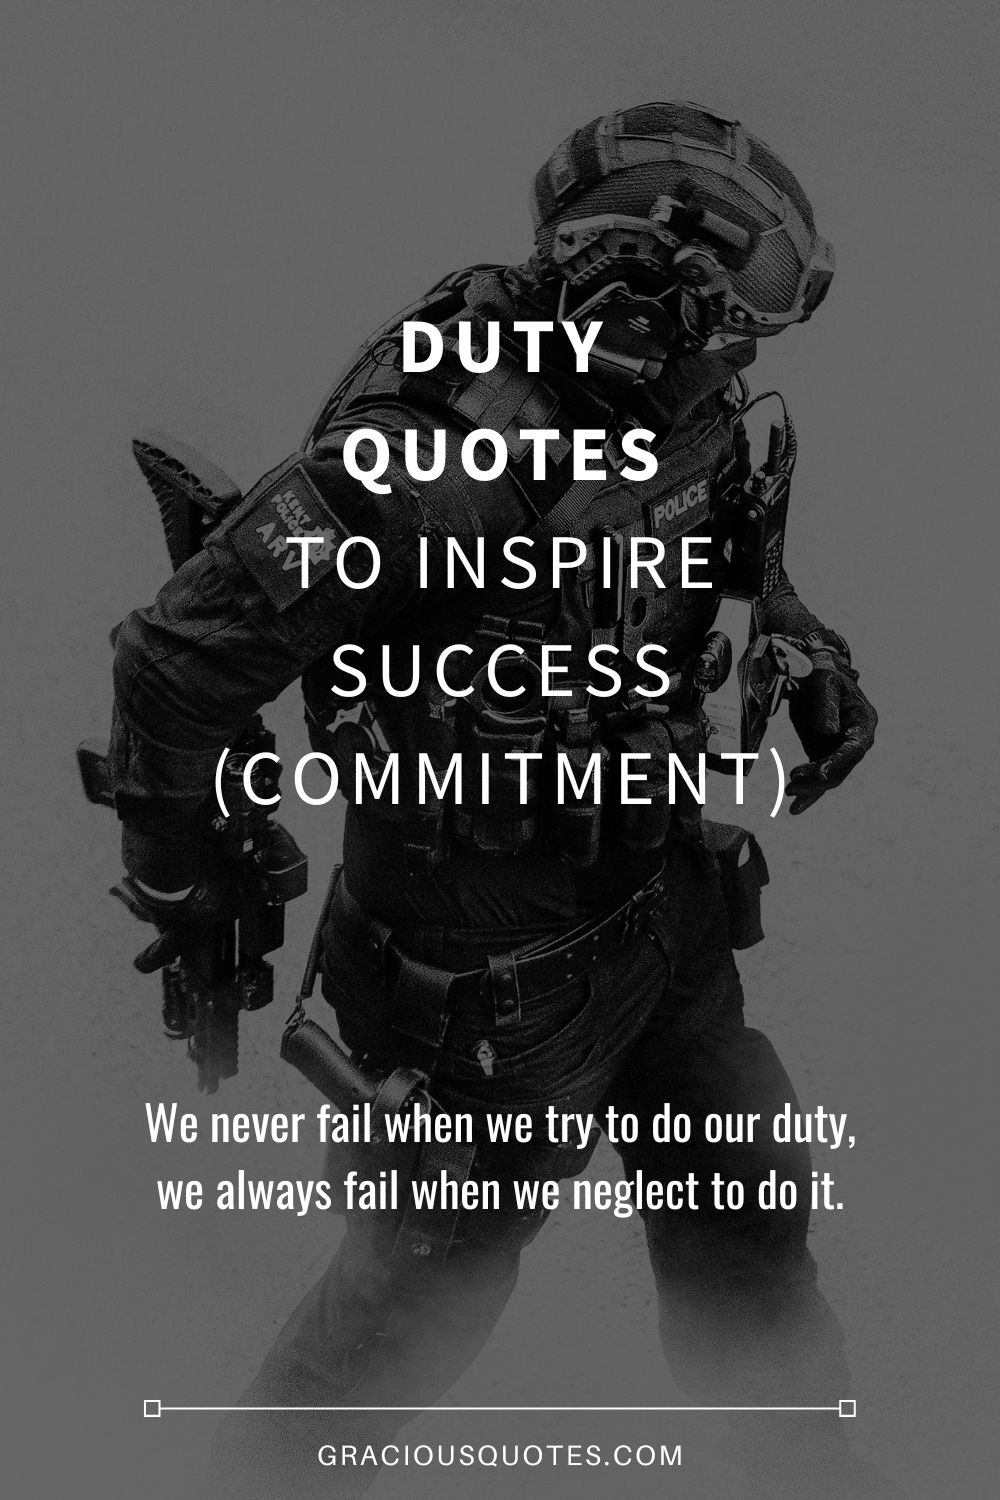 Duty Quotes to Inspire Success (COMMITMENT) - Gracious Quotes